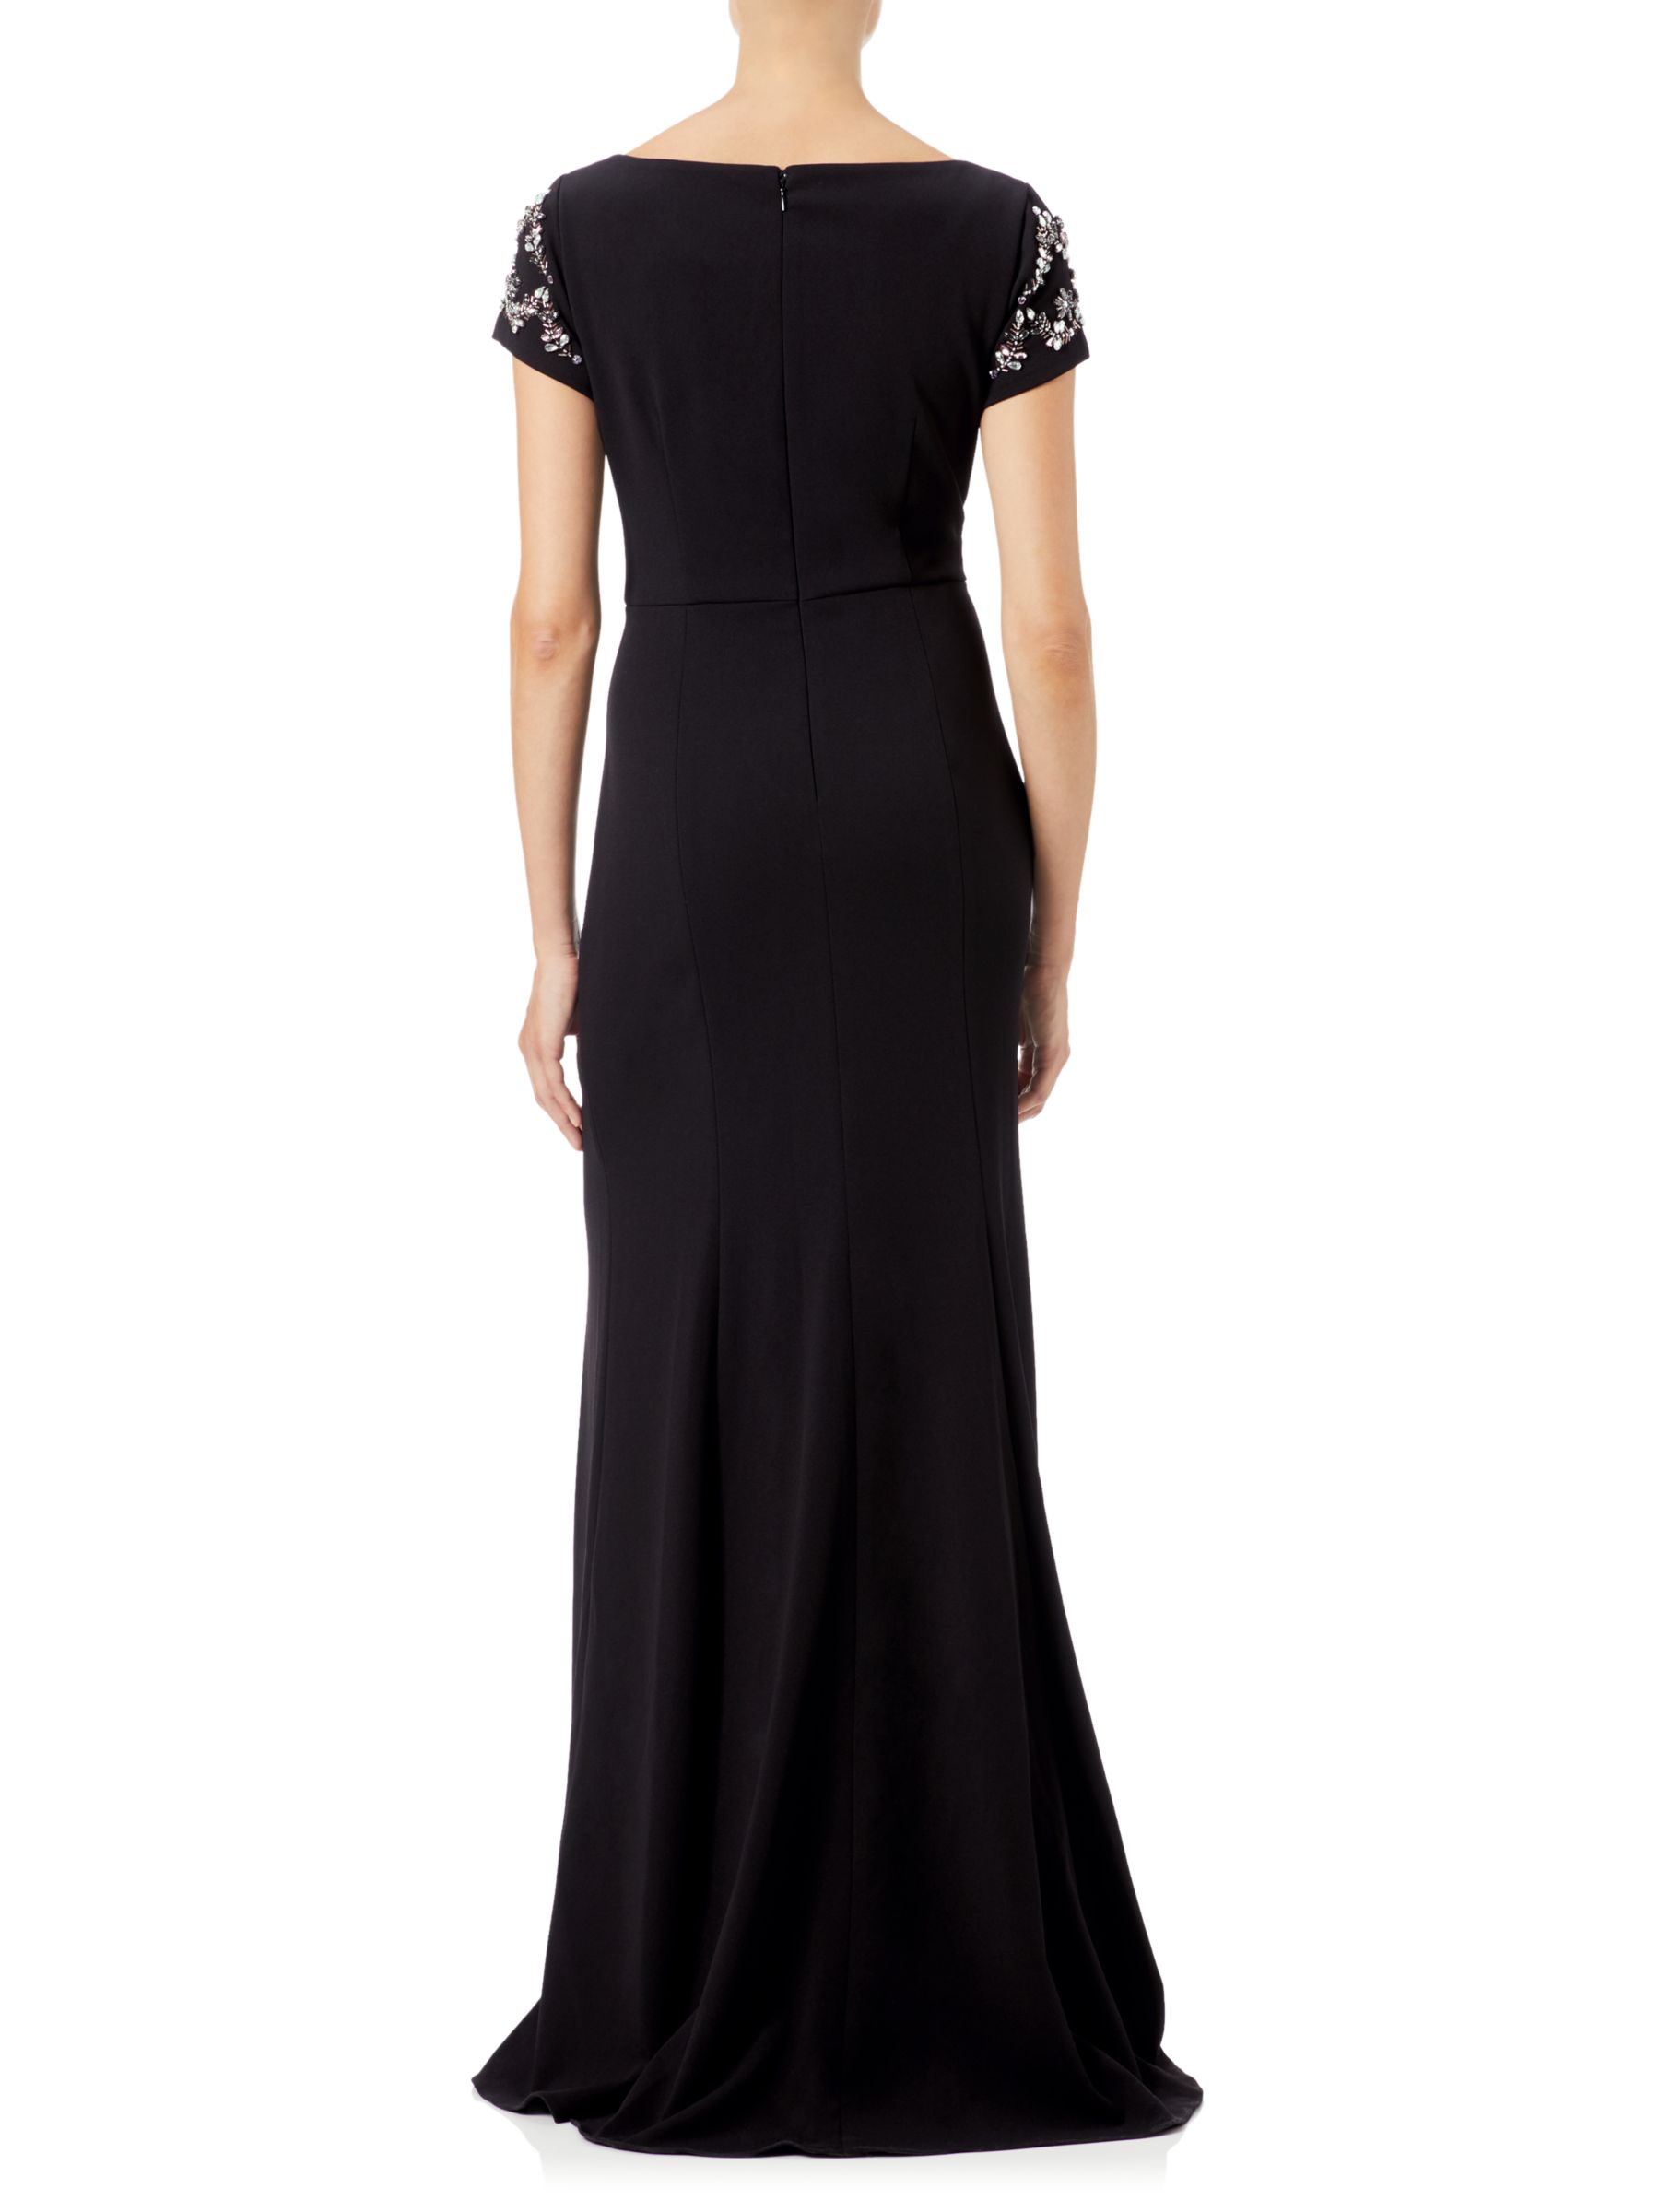 Adrianna Papell Side Pleat Crepe Knit Gown, Black